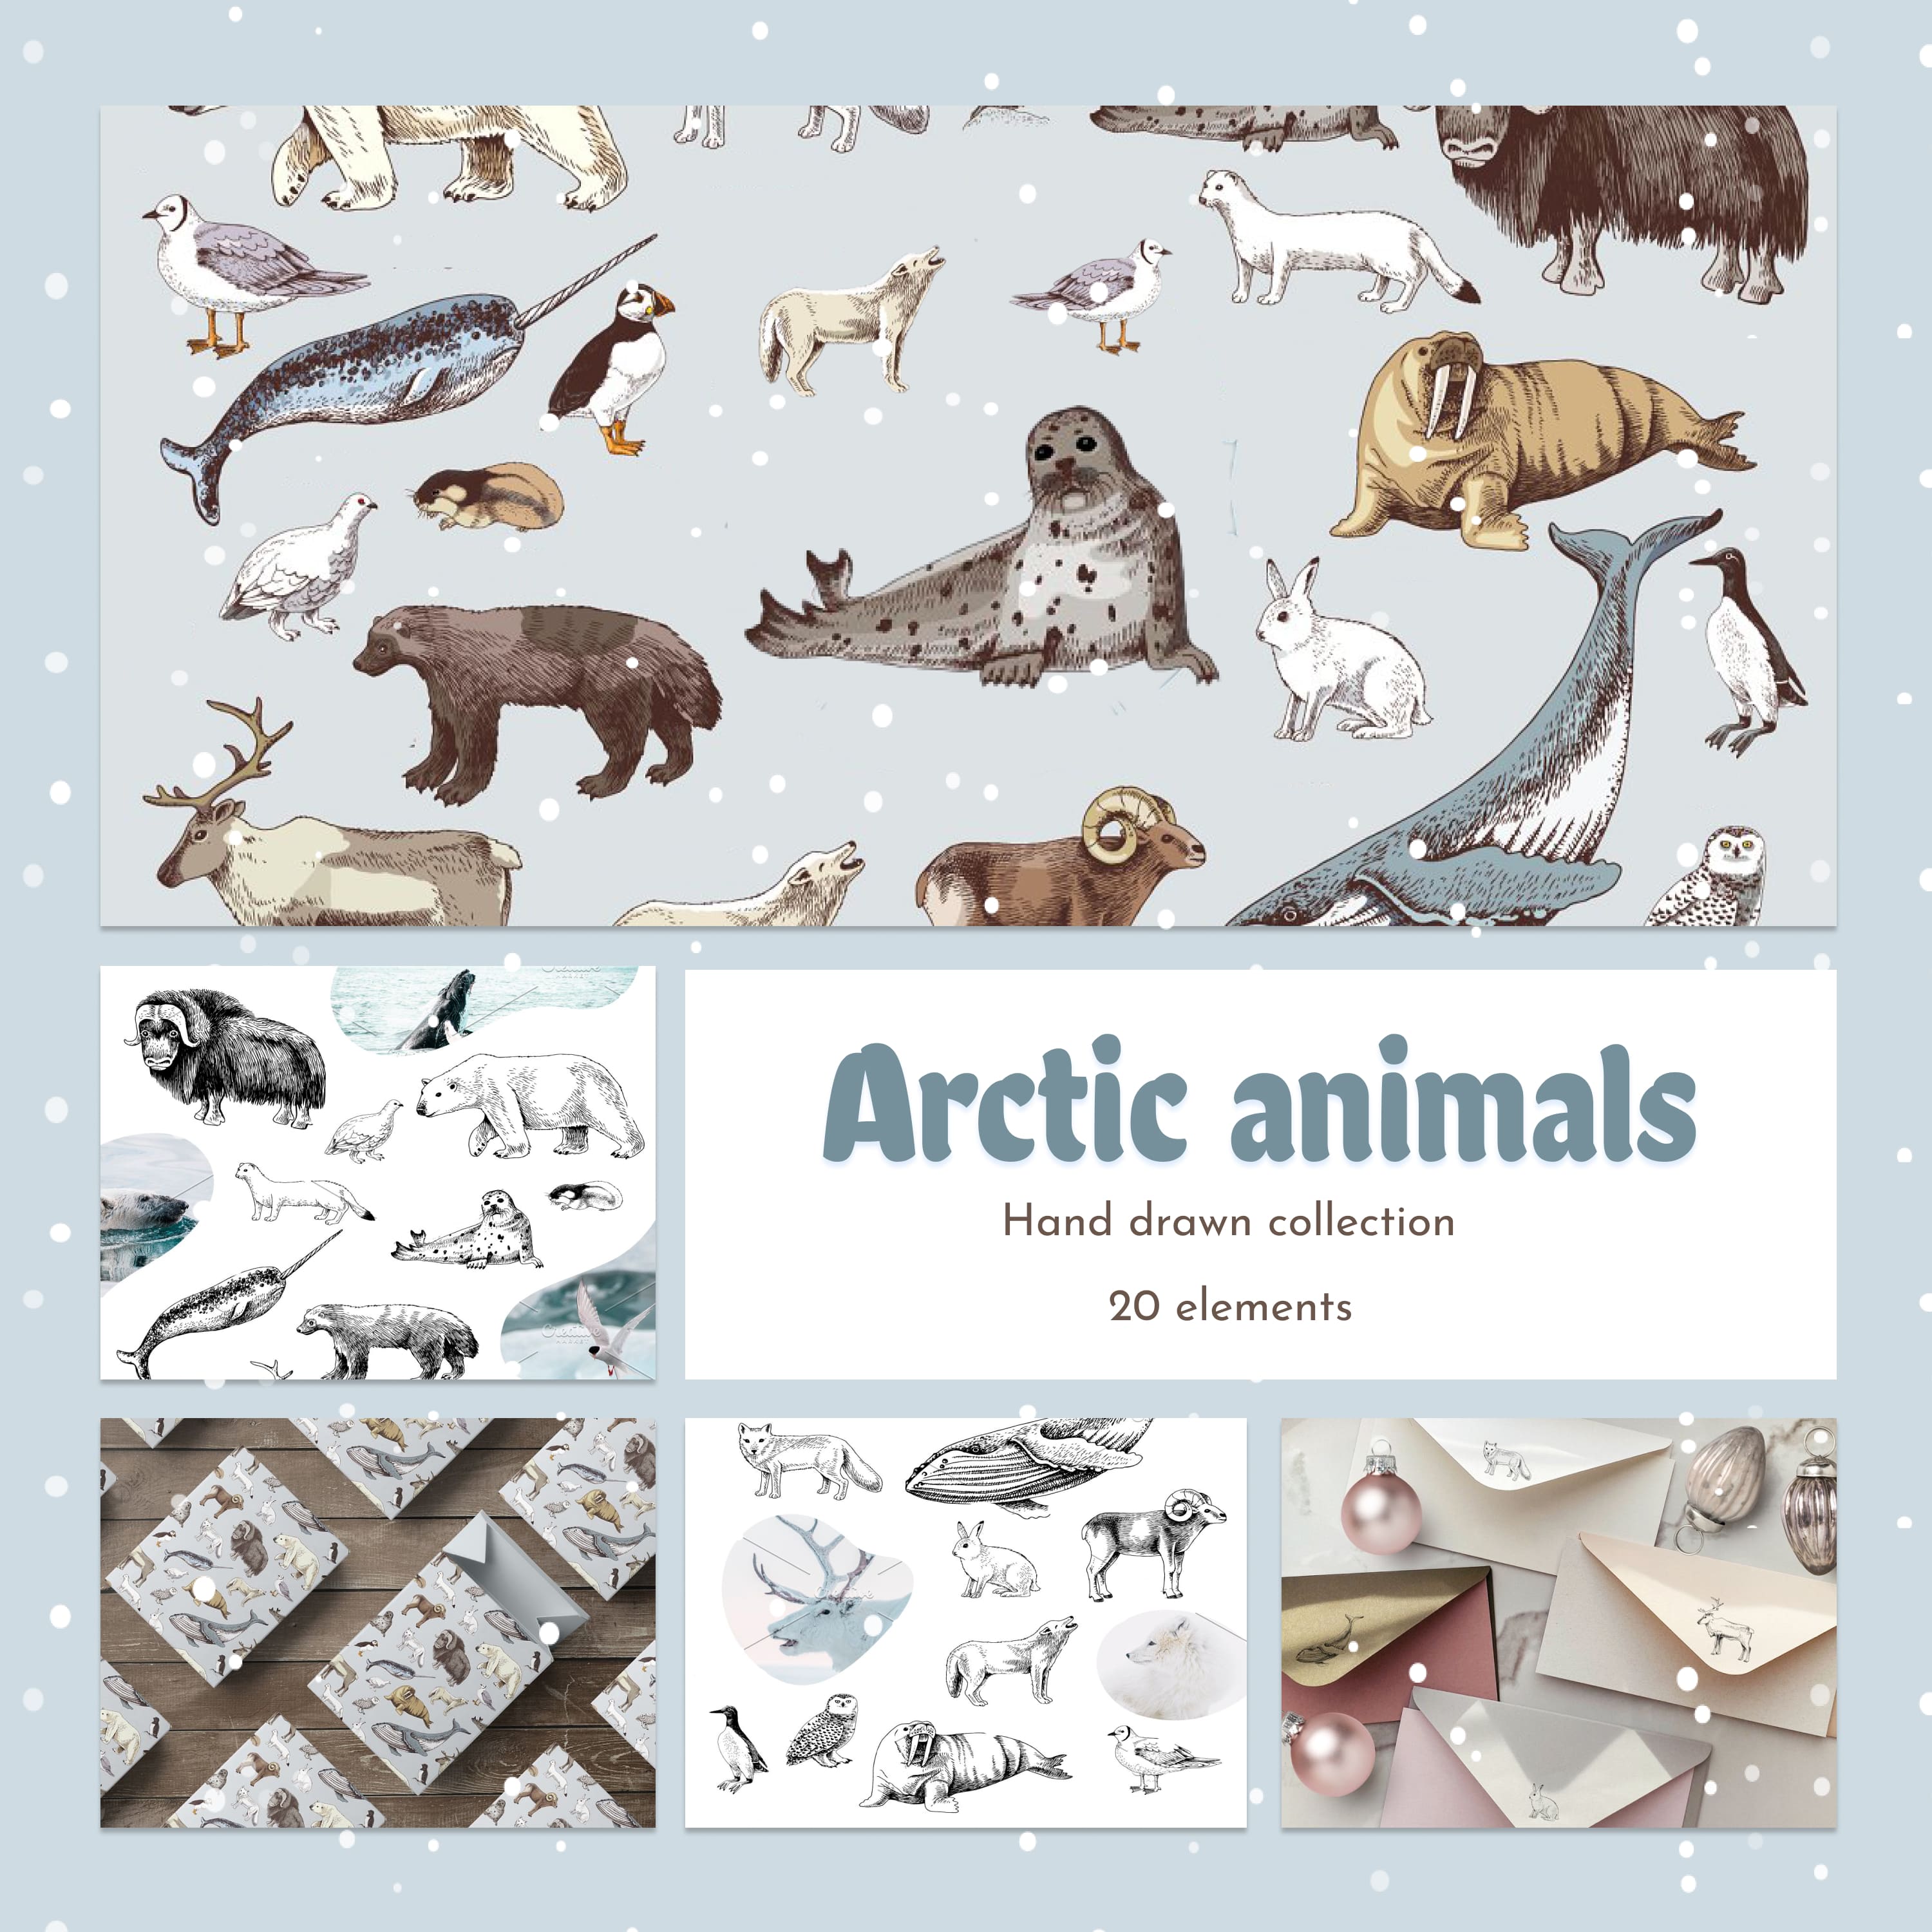 Hand drawn Arctic animals collection cover.